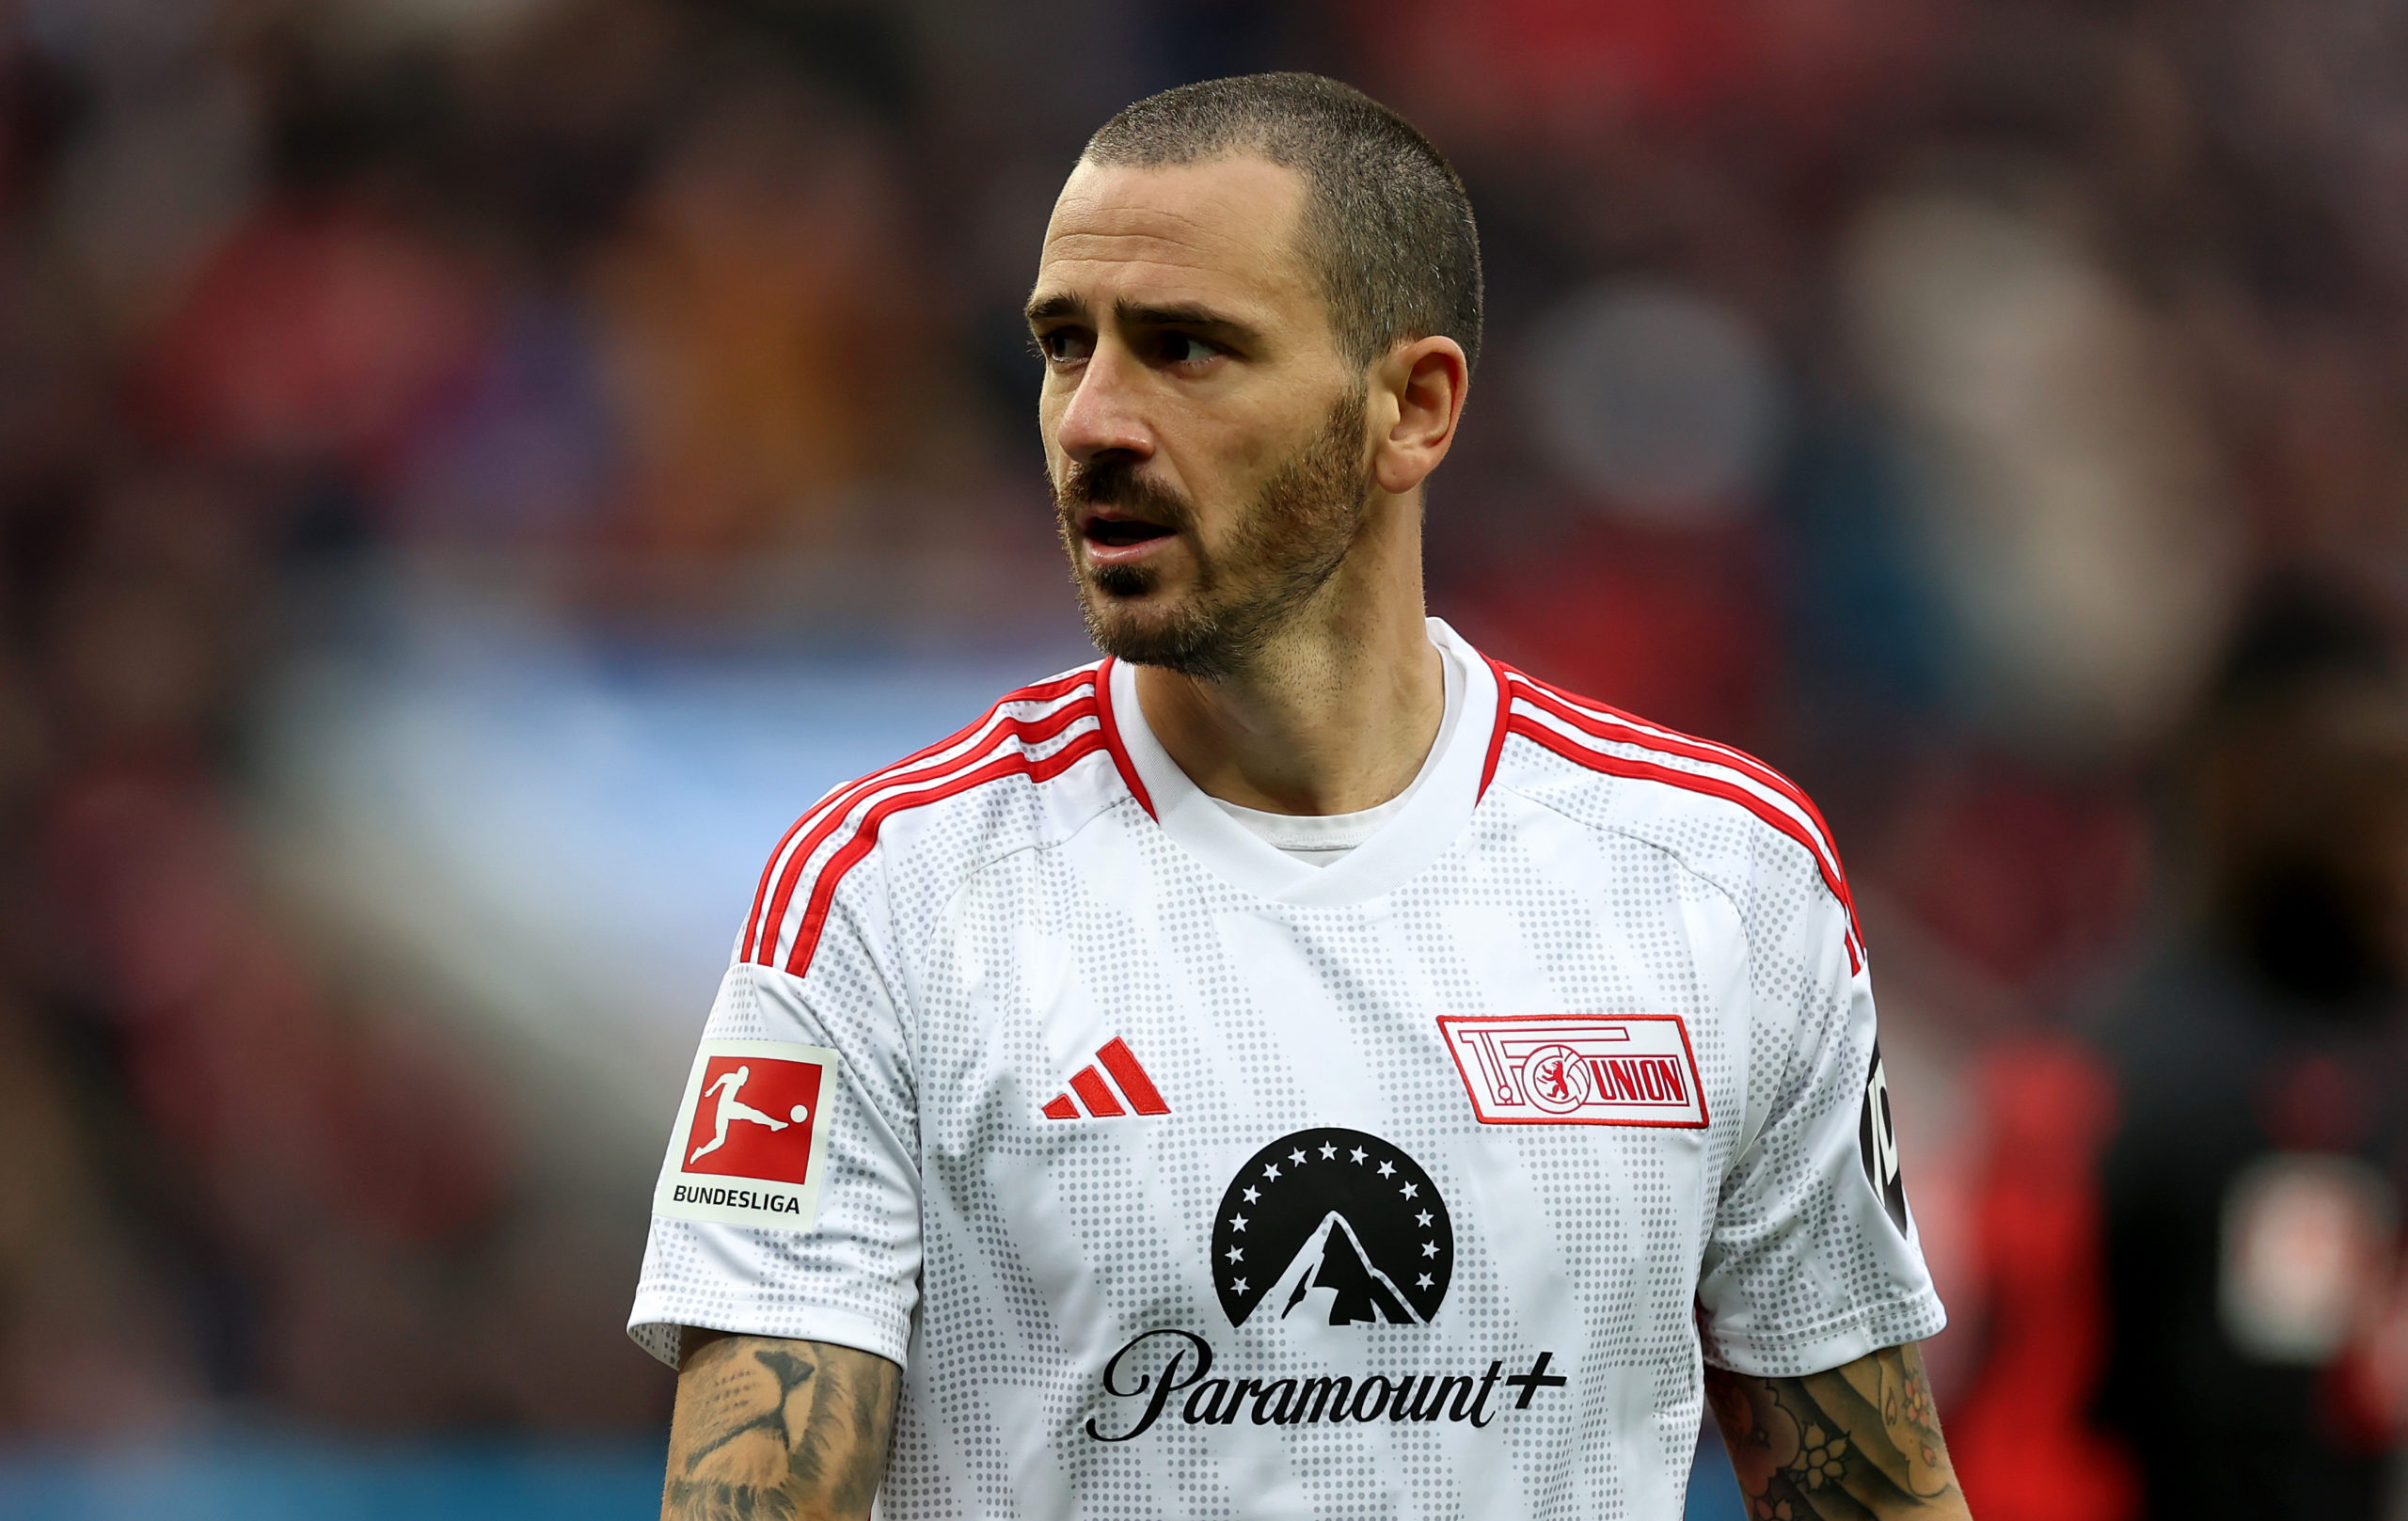 Just six months after his arrival, Leonardo Bonucci might not be long for Union Berlin, and Roma are mulling making a run at him.